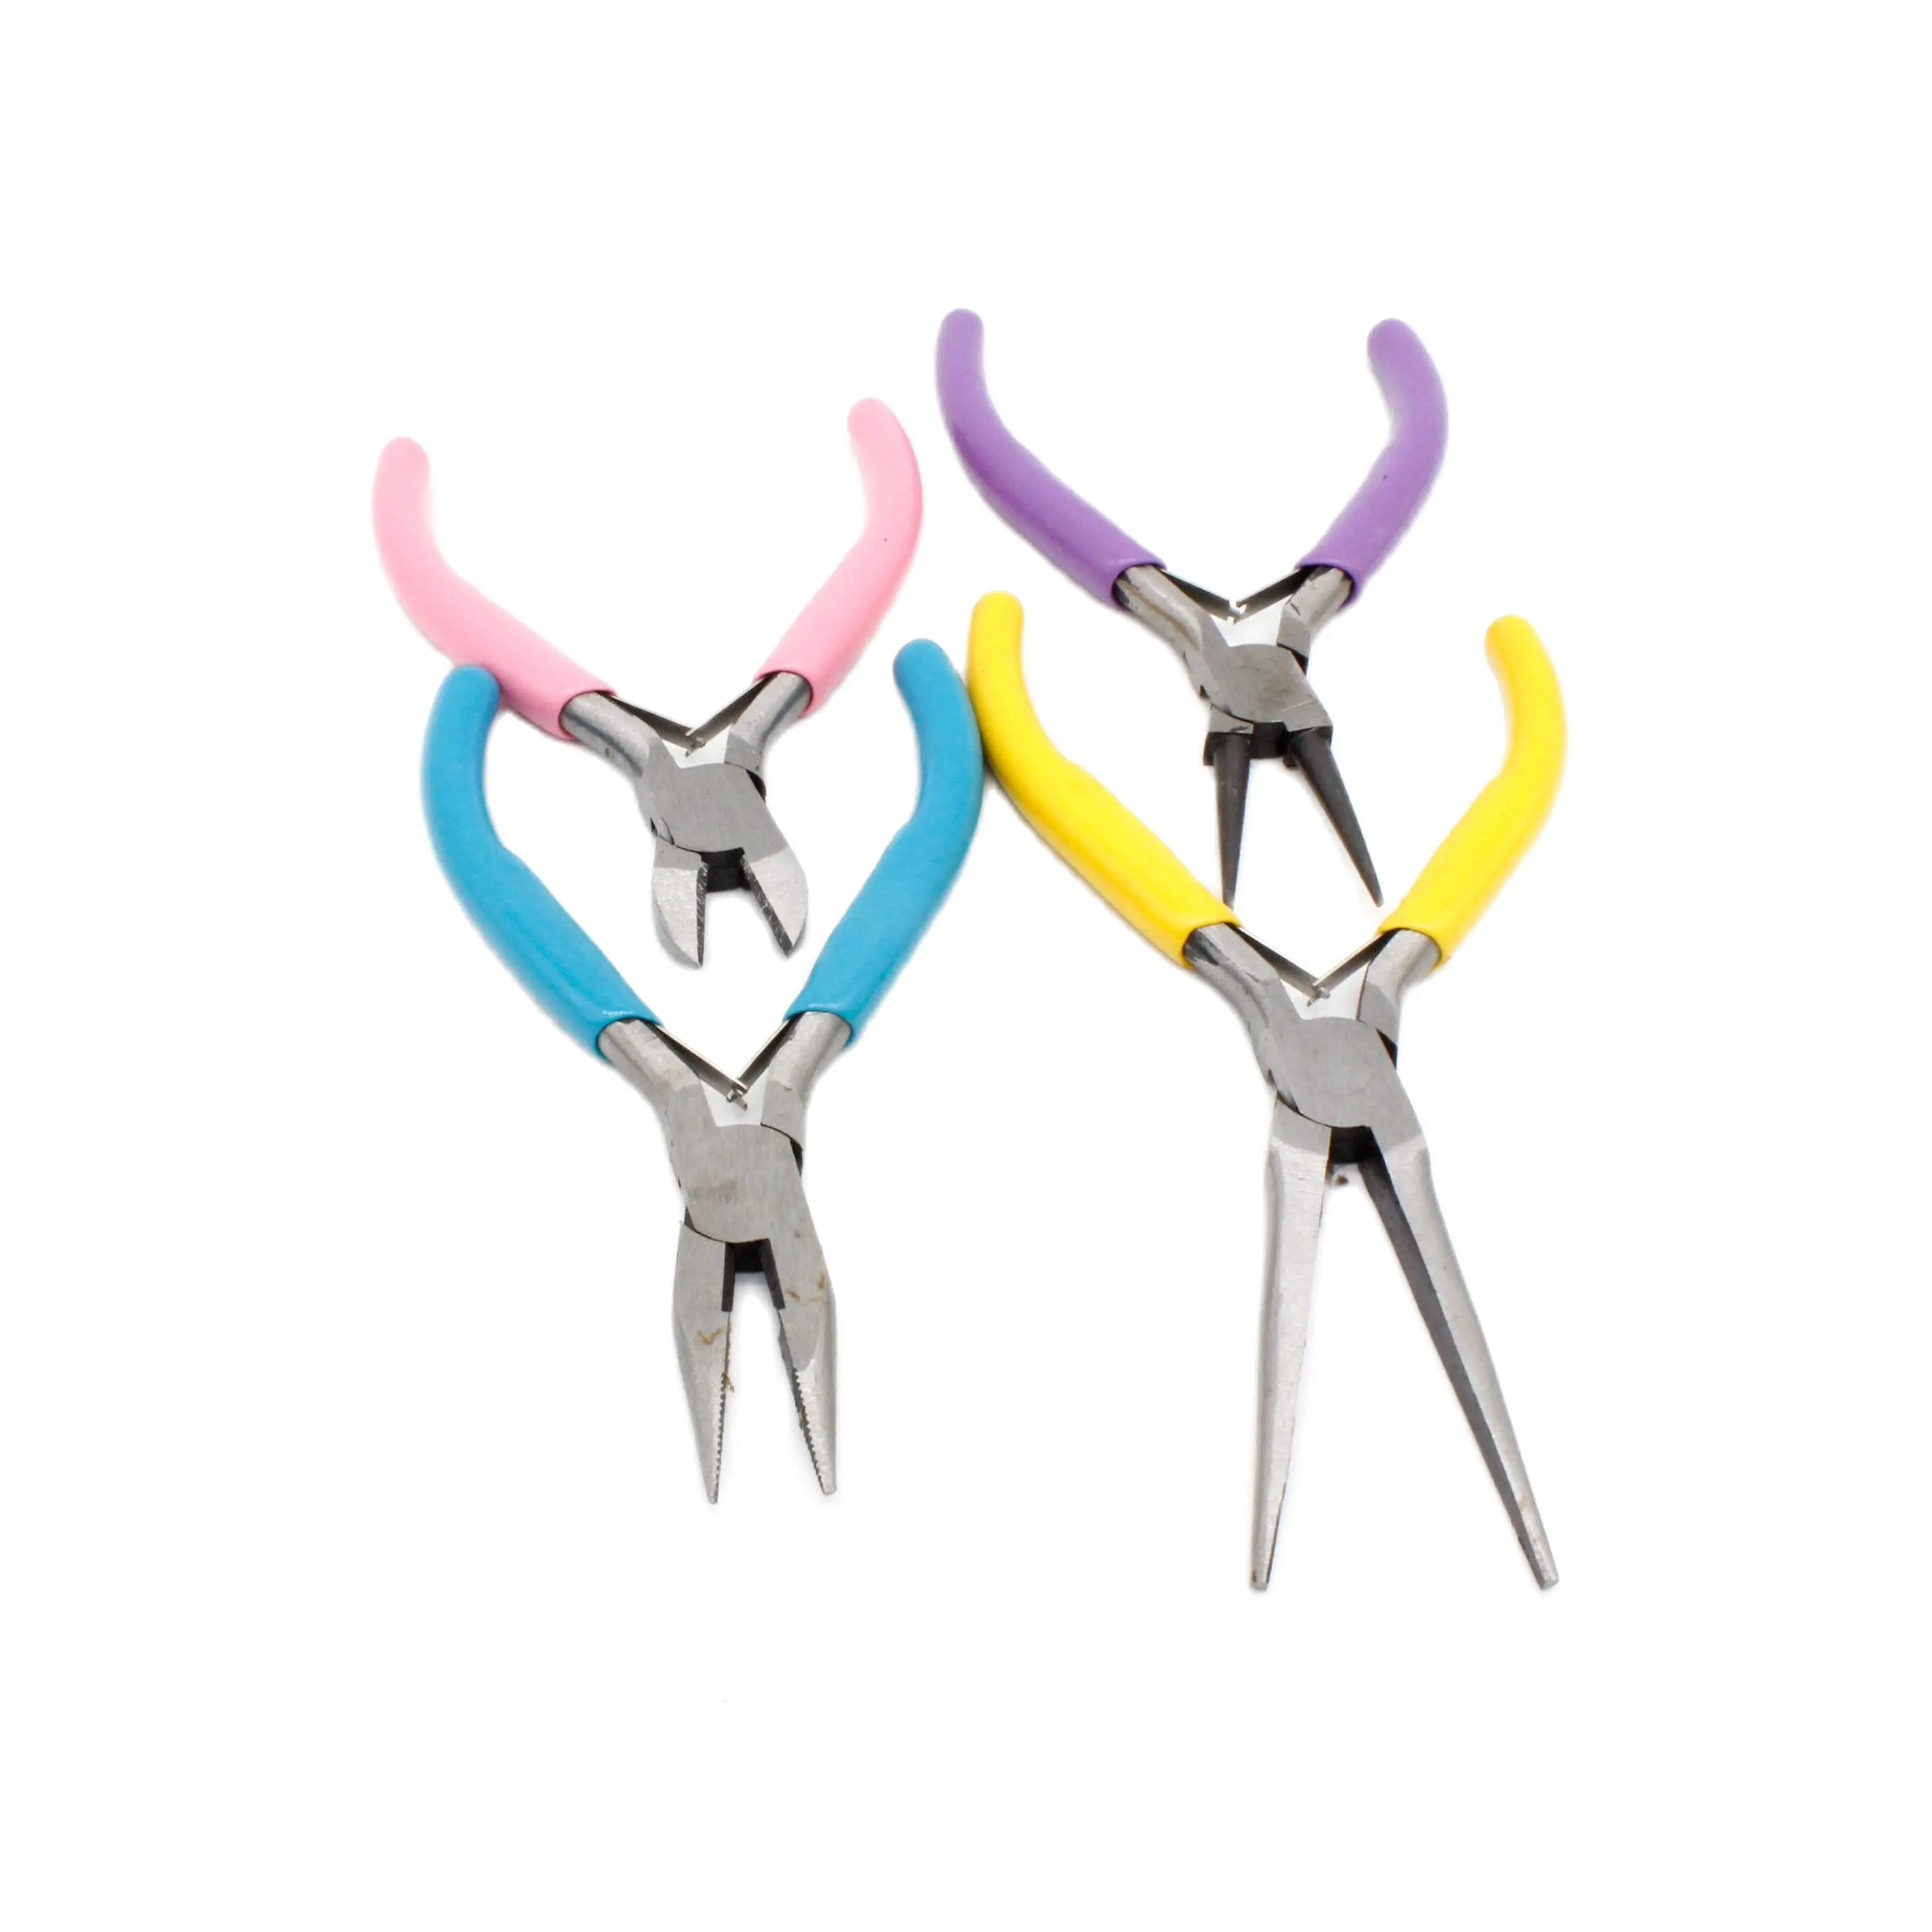 

4 Inch Flat Nose Plier Round Nose Plier Side Cutting Pliers Jewelry Making Tool